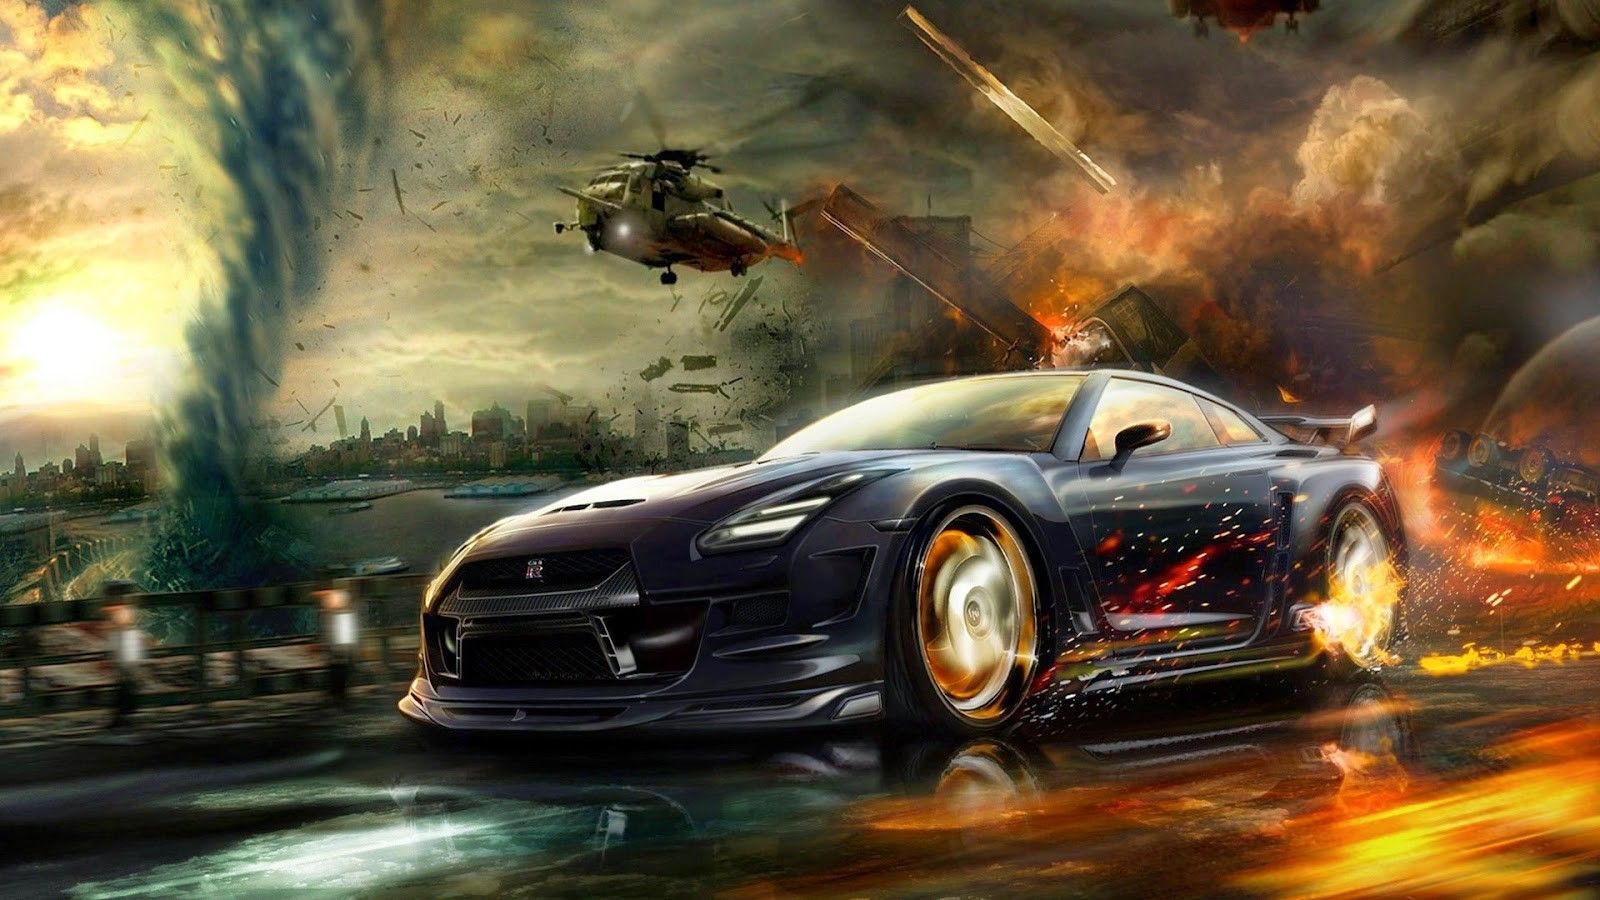 video Games, Rally Cars, Racer, Need For Speed: No Limits, Fantasy